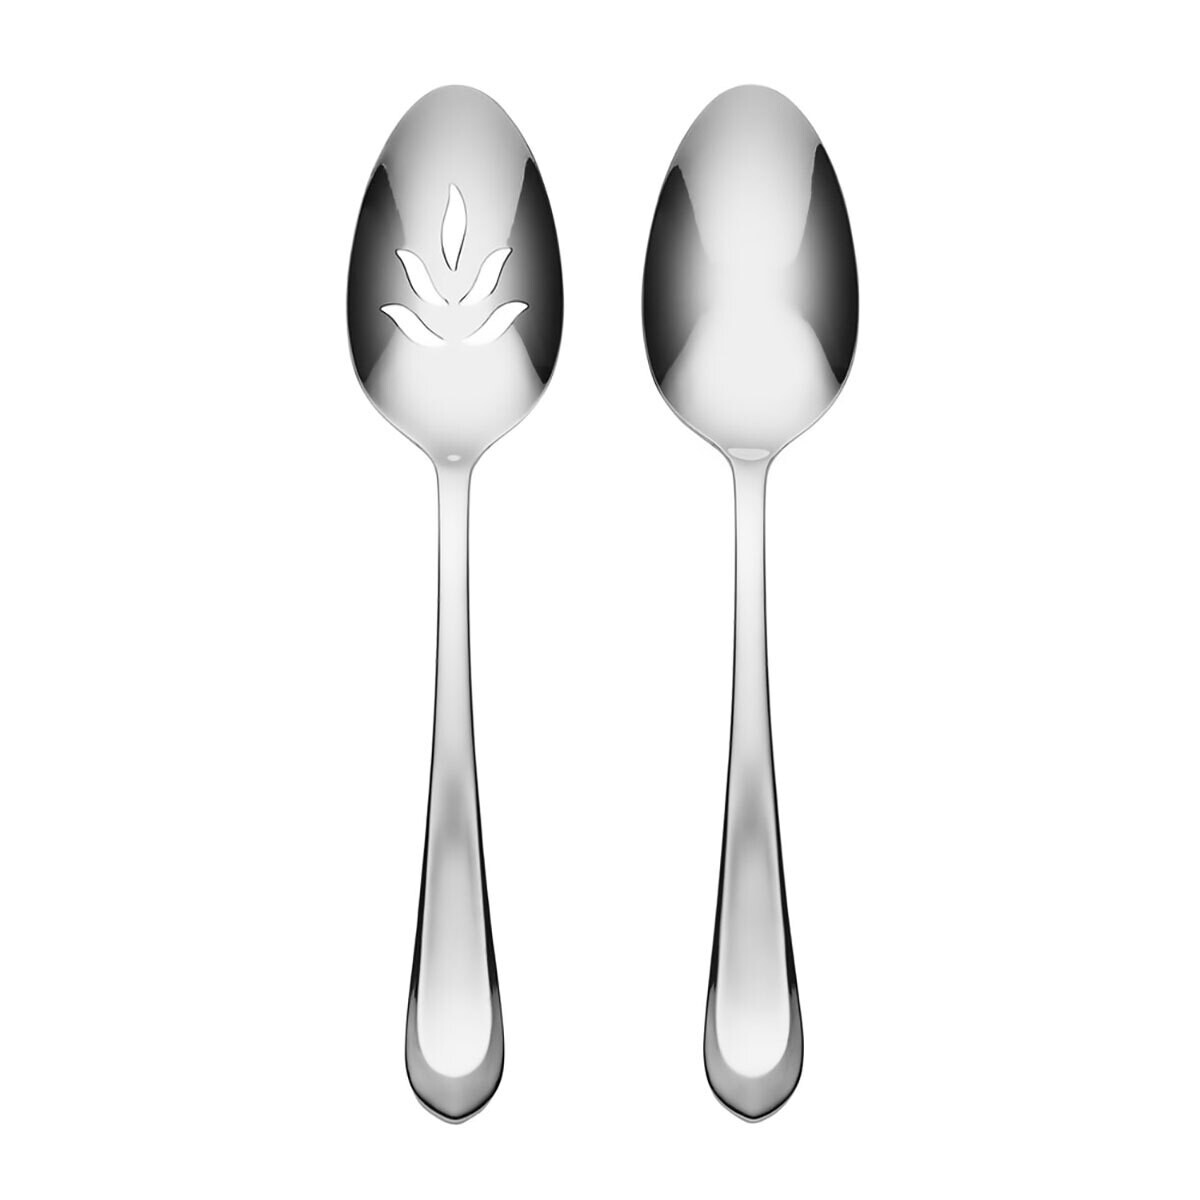 Hampton Forge Alessi 2 Piece Serving Spoons 895328